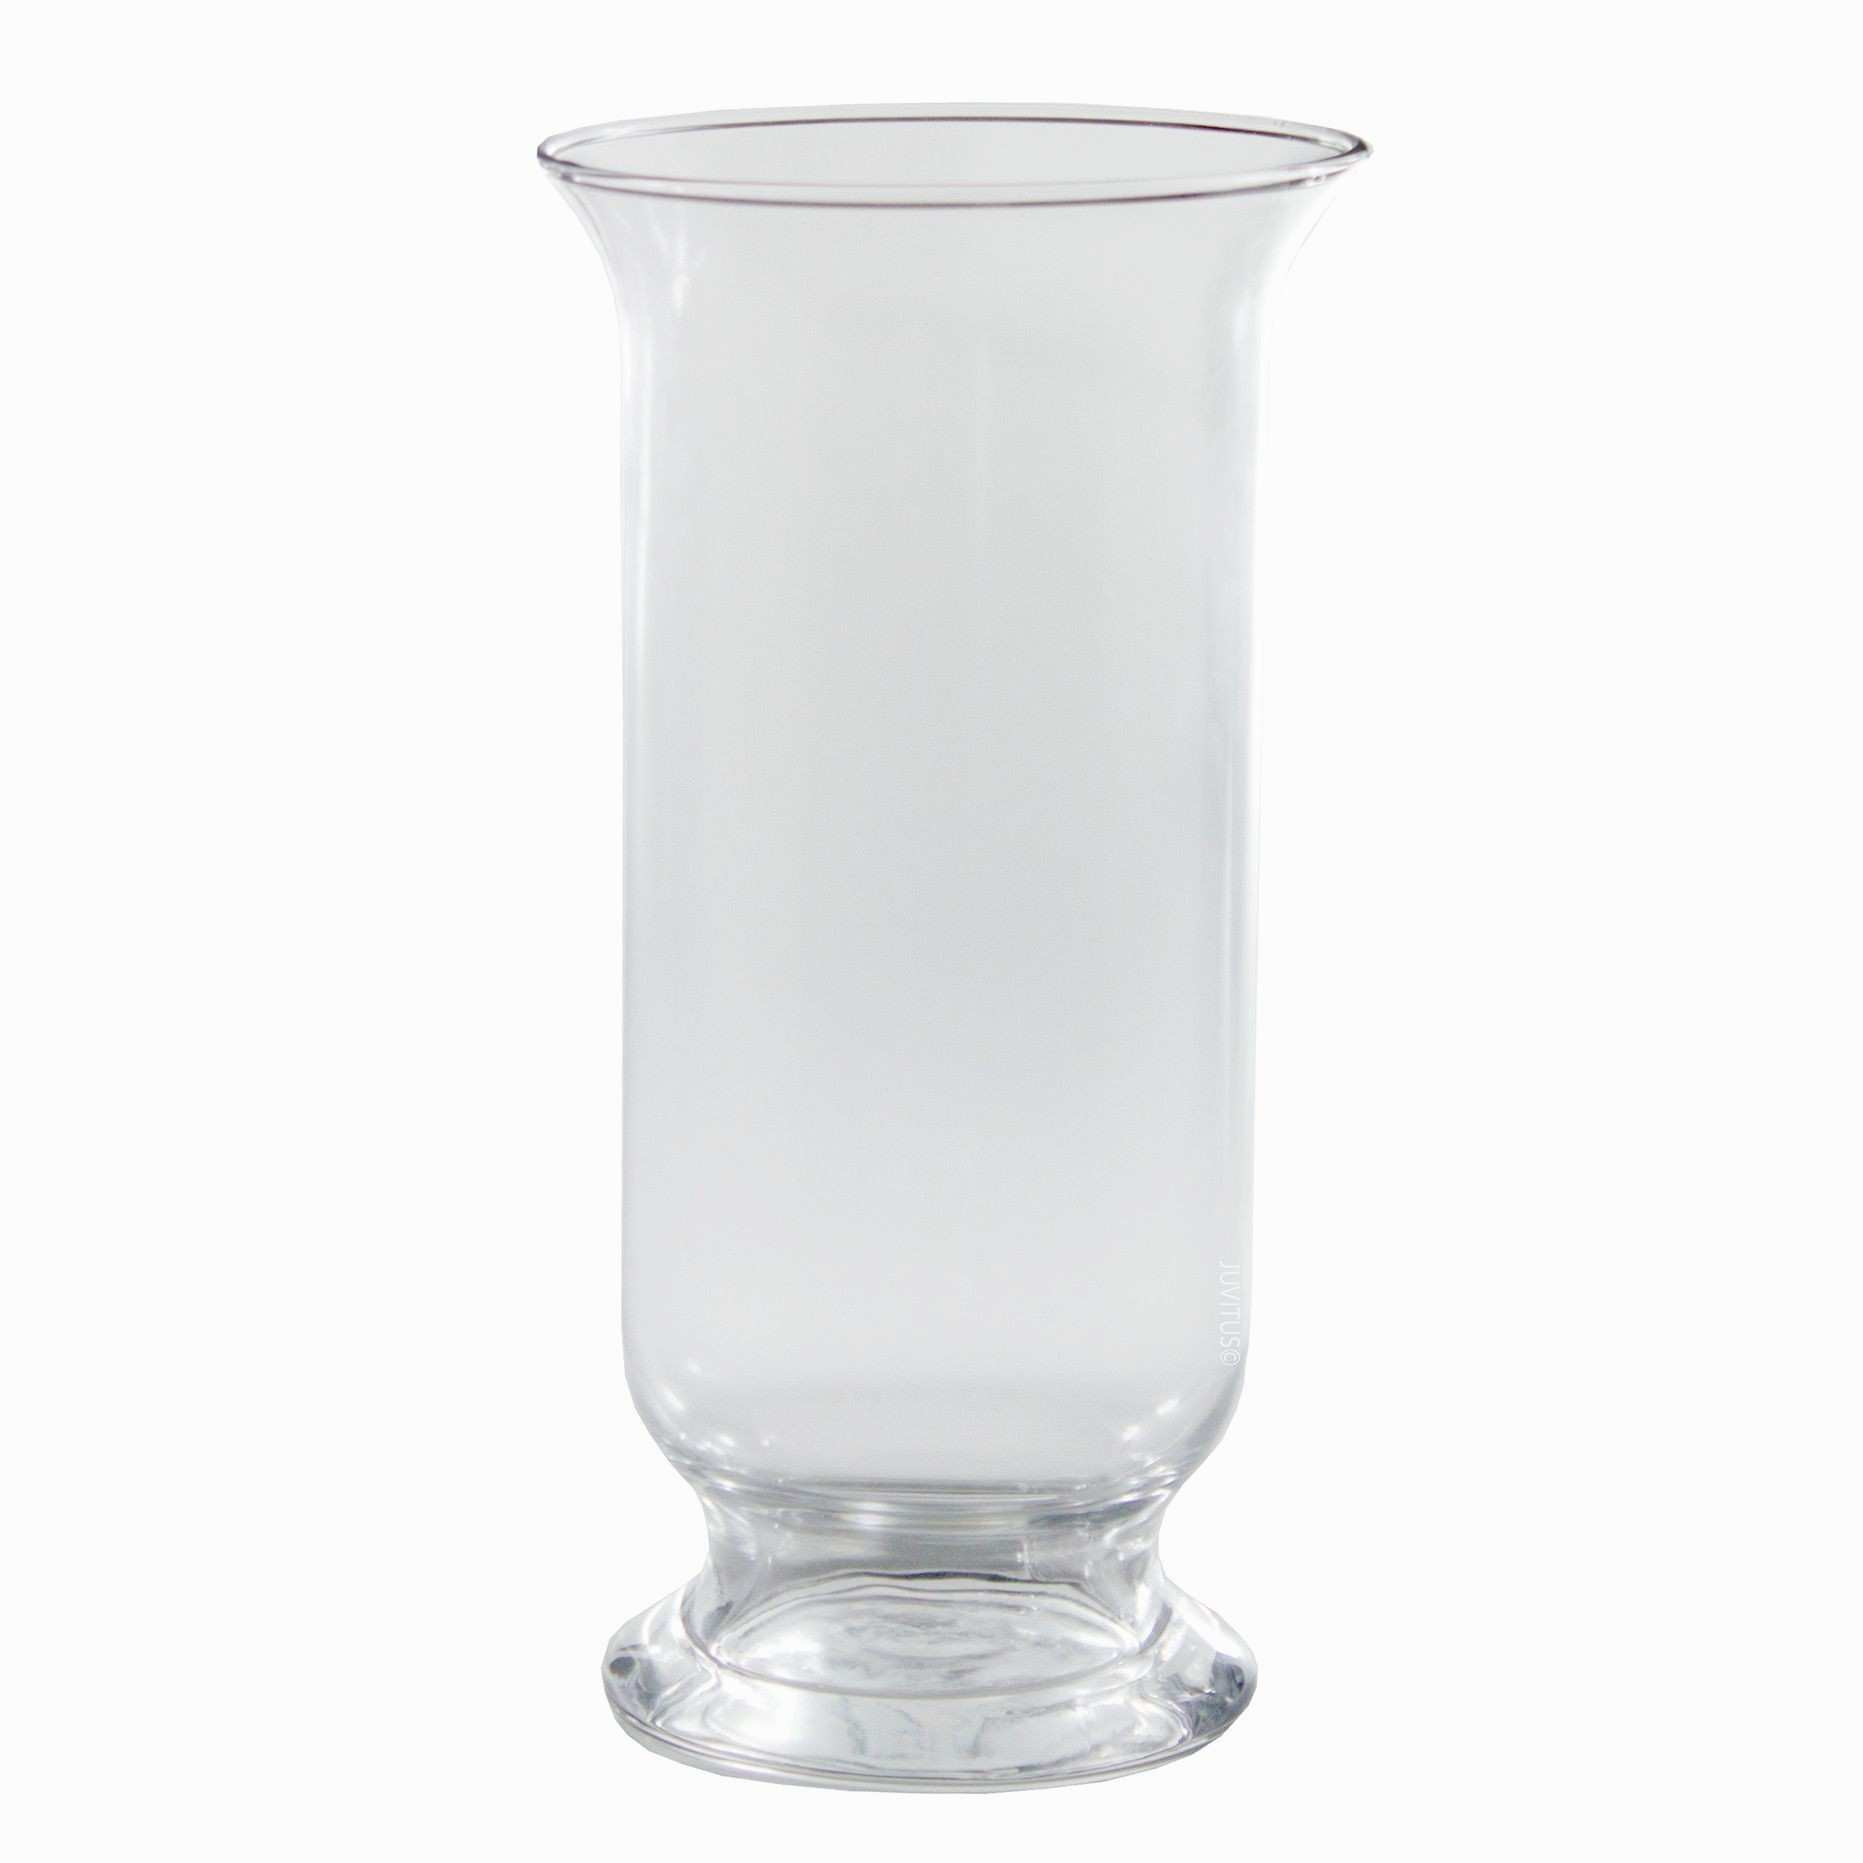 22 Awesome Cheap Tall Clear Glass Vases 2024 free download cheap tall clear glass vases of 35 magnificent pedestal hurricane candle holders azcounselrealty com throughout pedestal hurricane candle holders unique 10 tall clear glass pedestal hurrican